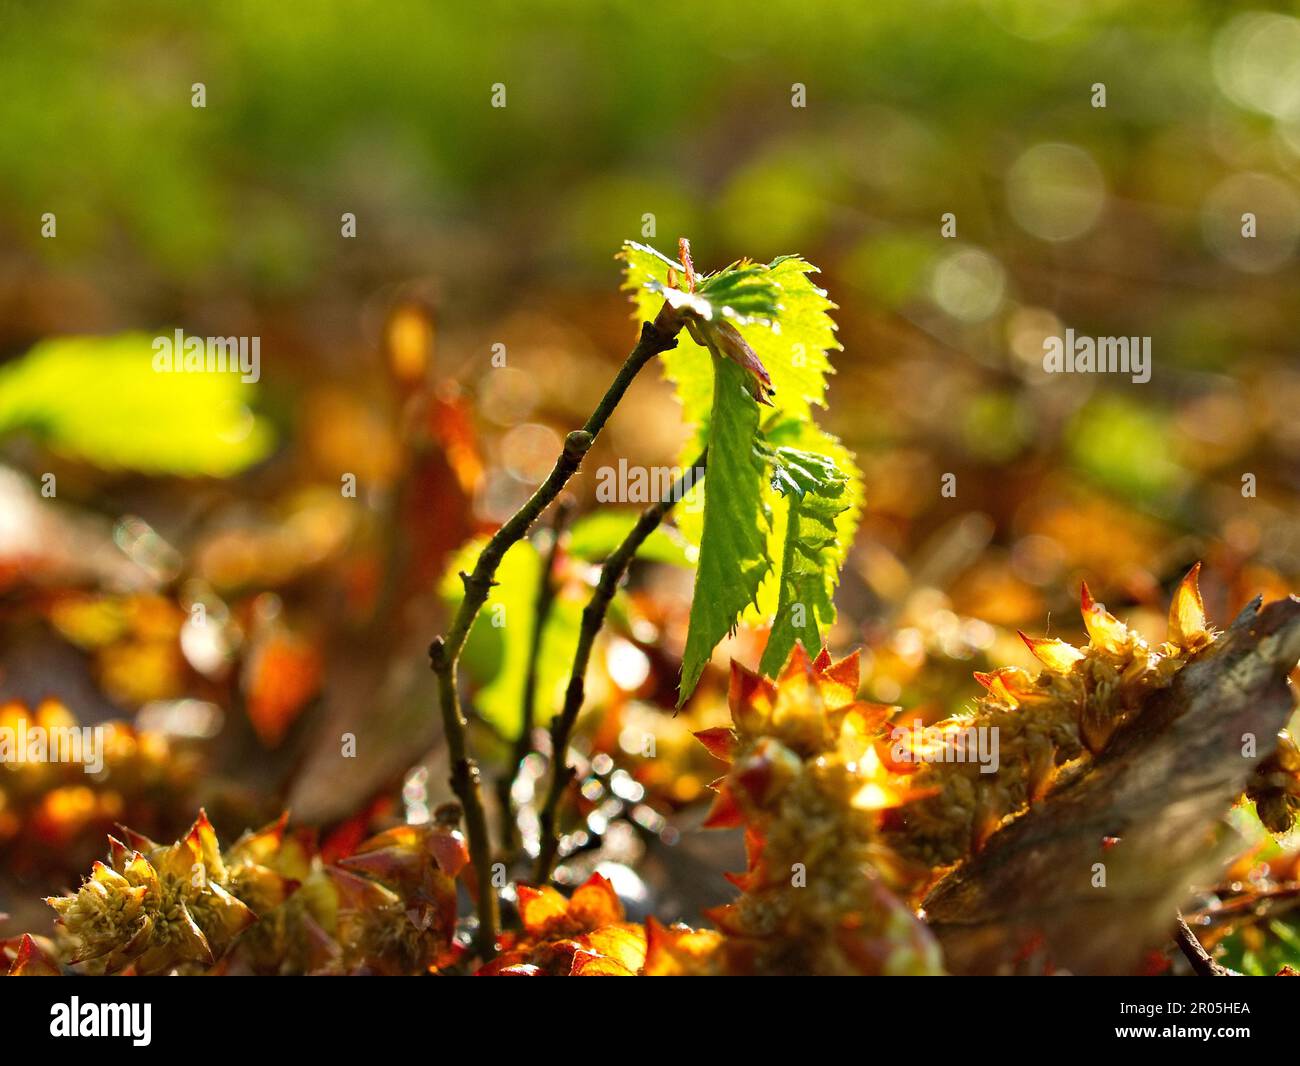 new life in the forest small seedlings grow into large trees Stock Photo